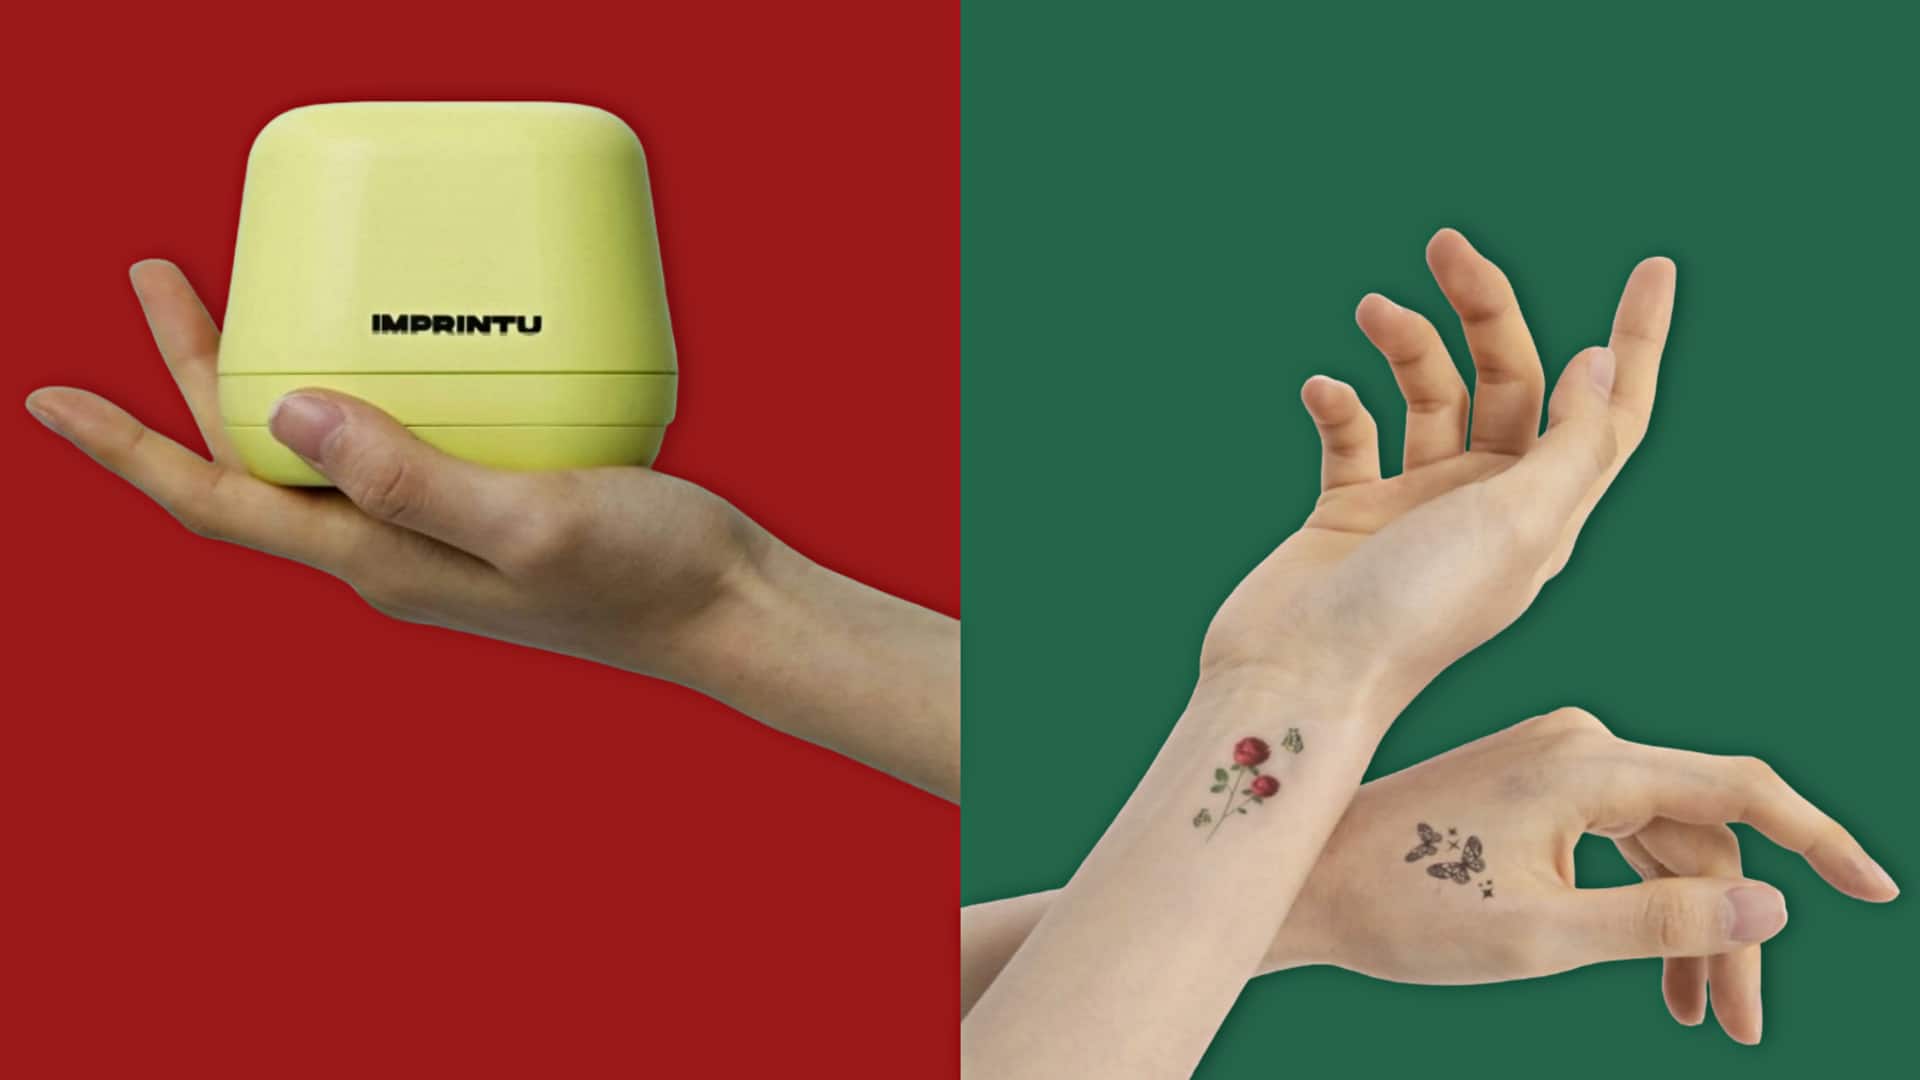 LG introduces IMPRINTU portable tattoo machine: Here's how it works